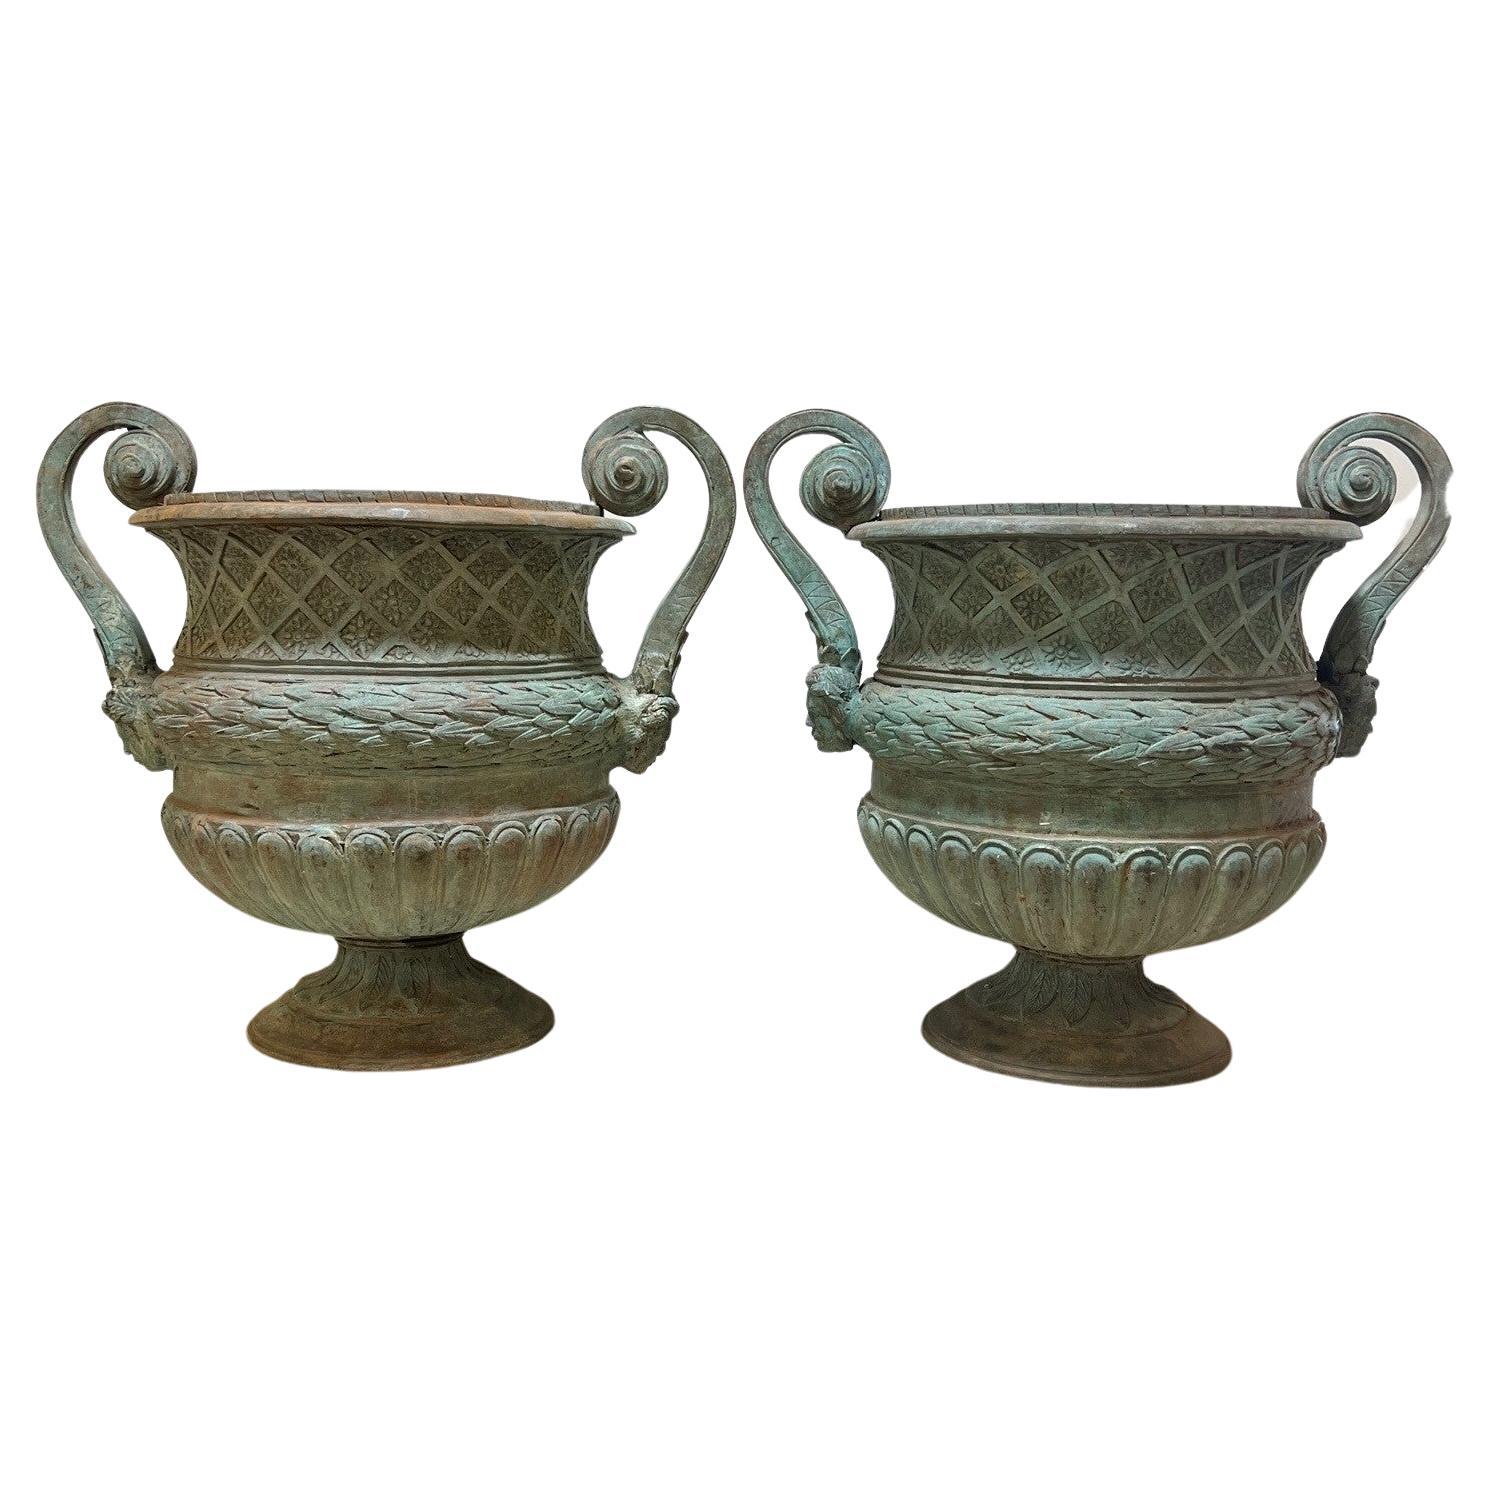 Late 20th Century Pair of Bronze Urns with Handles and a Verde Patina